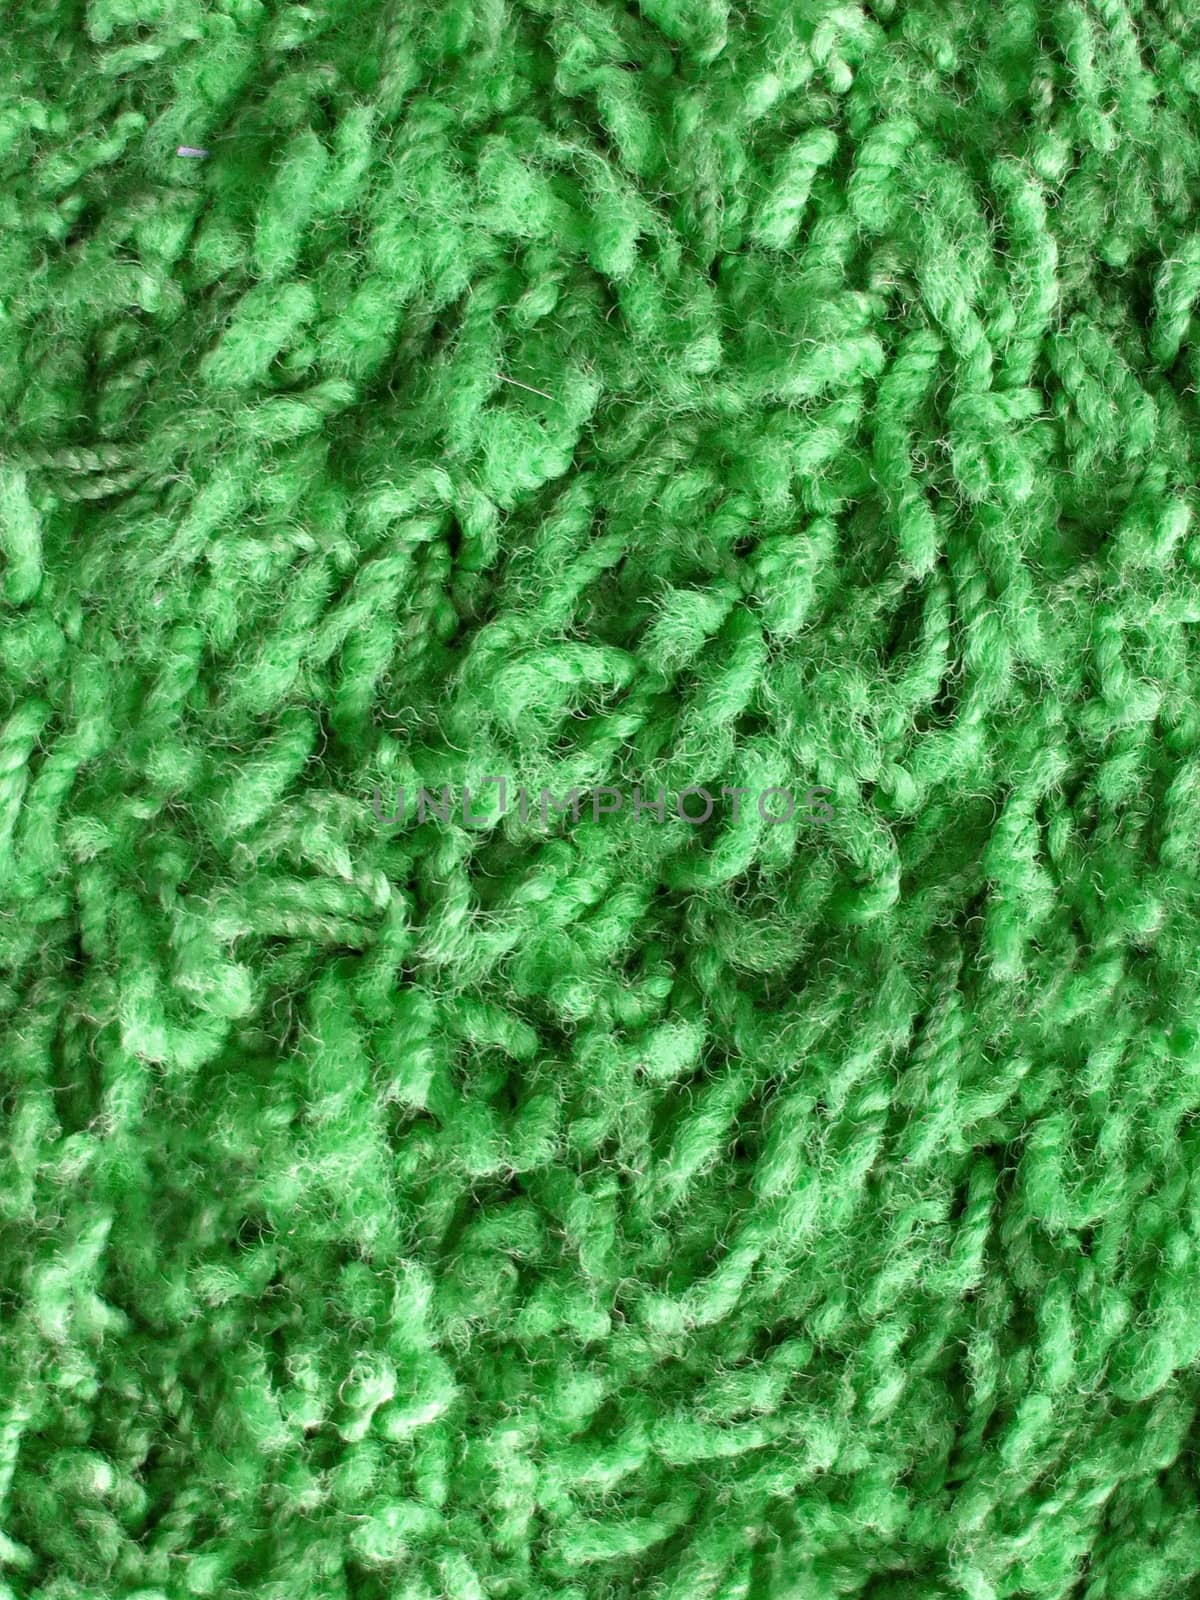 Carpet of green artificial grass for background